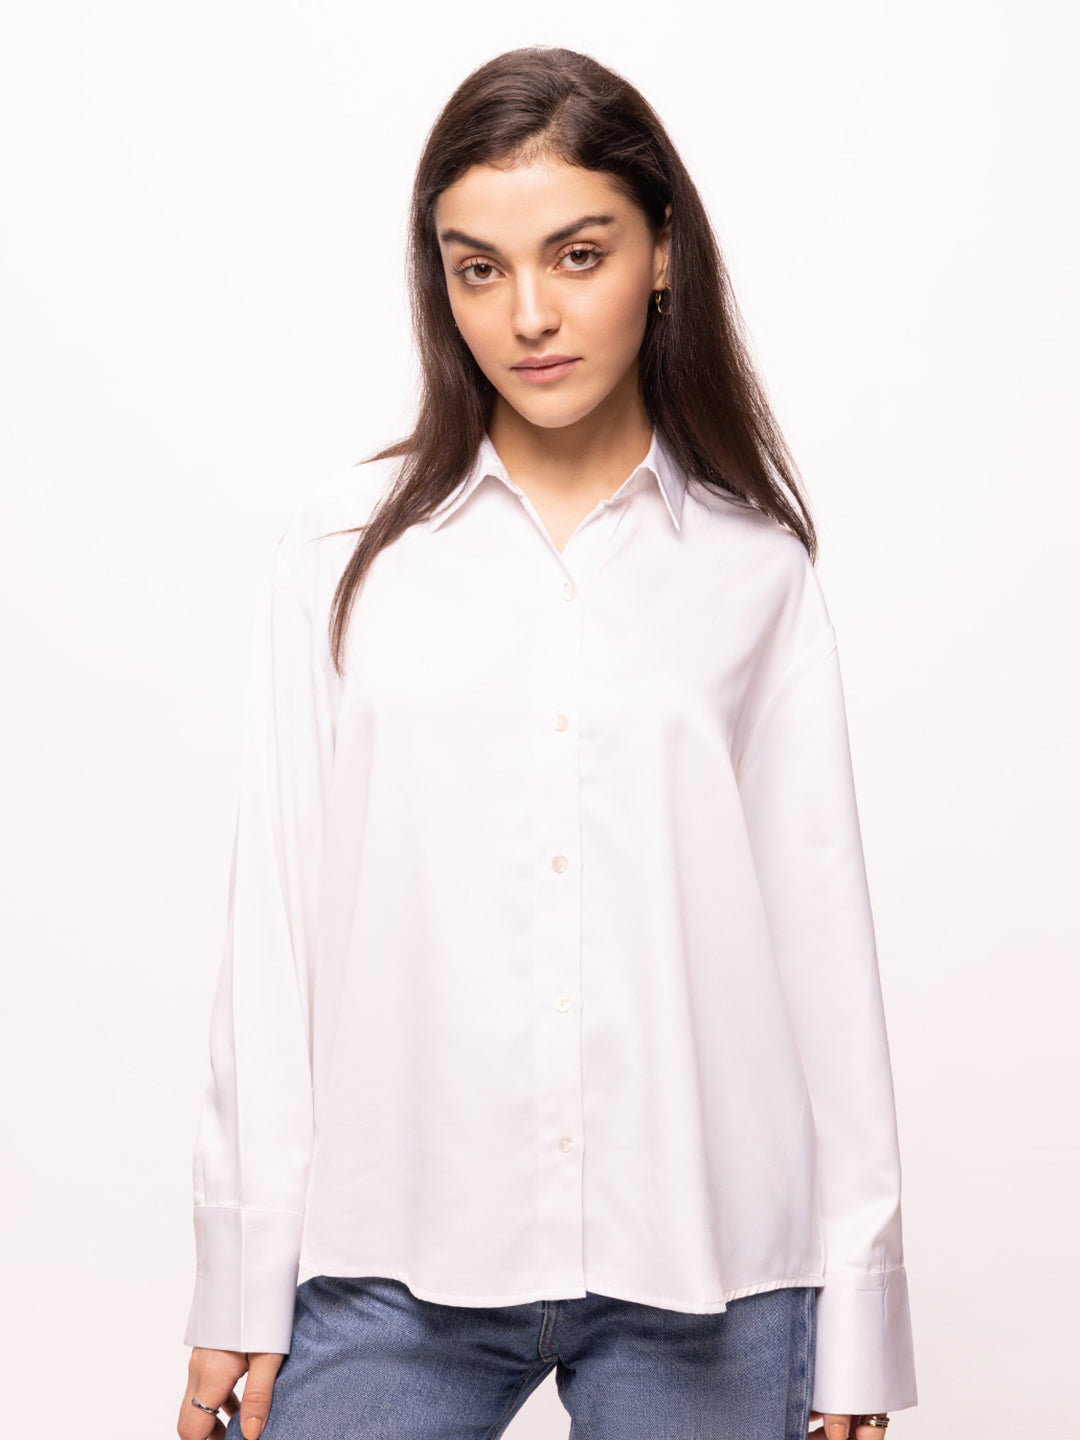 Bombay High Women's Pearl White Solid Satin Shirt